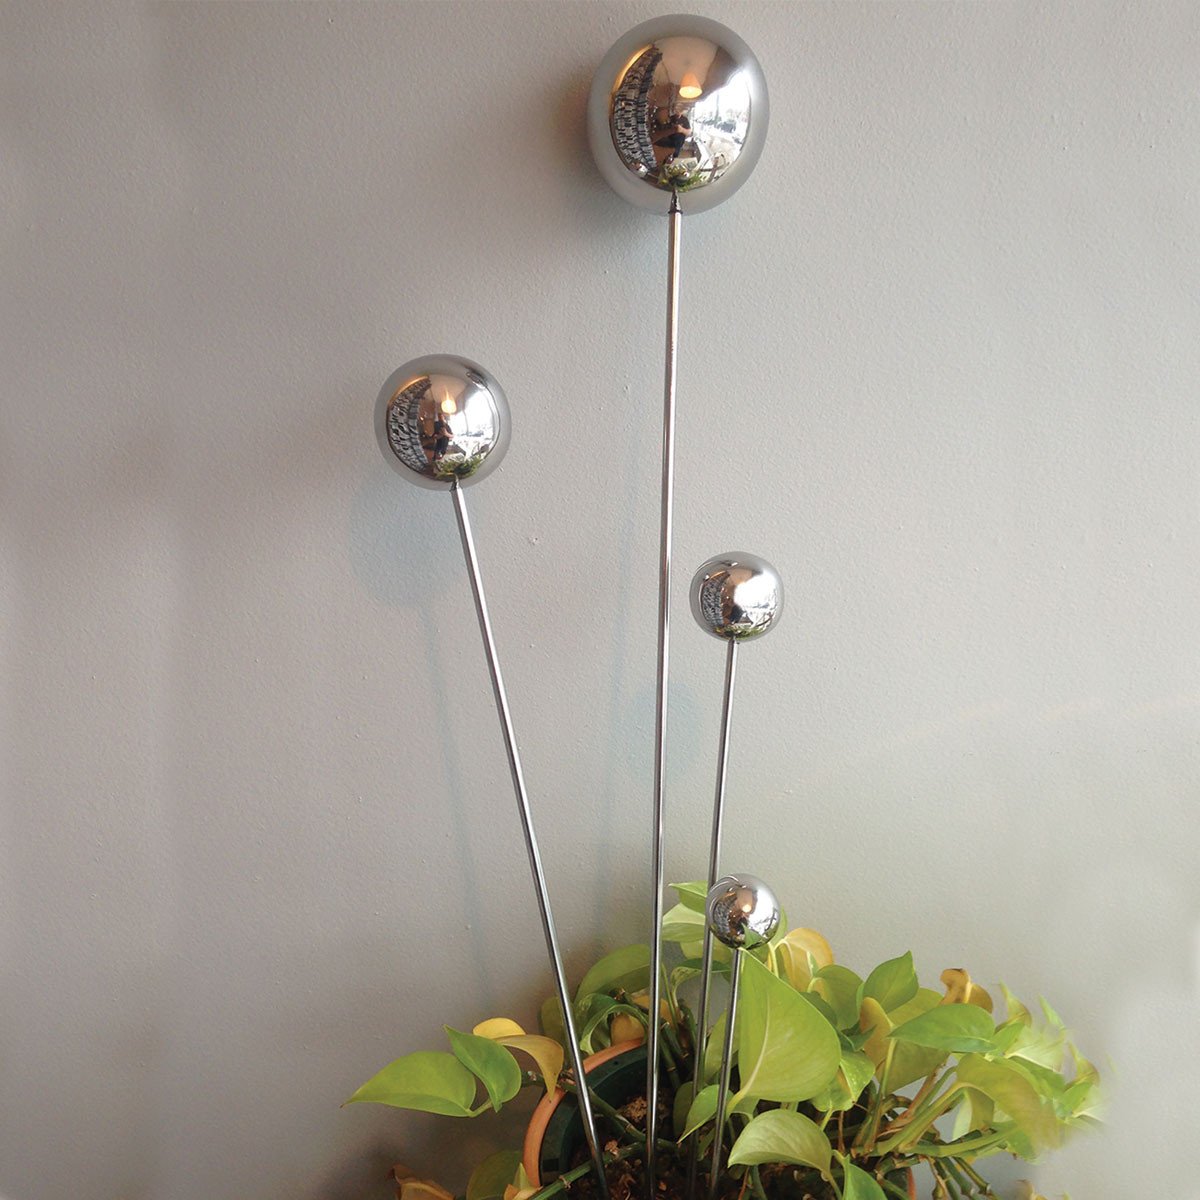 Small Stainless Steel Garden Lollipop Stakes, Rome #715